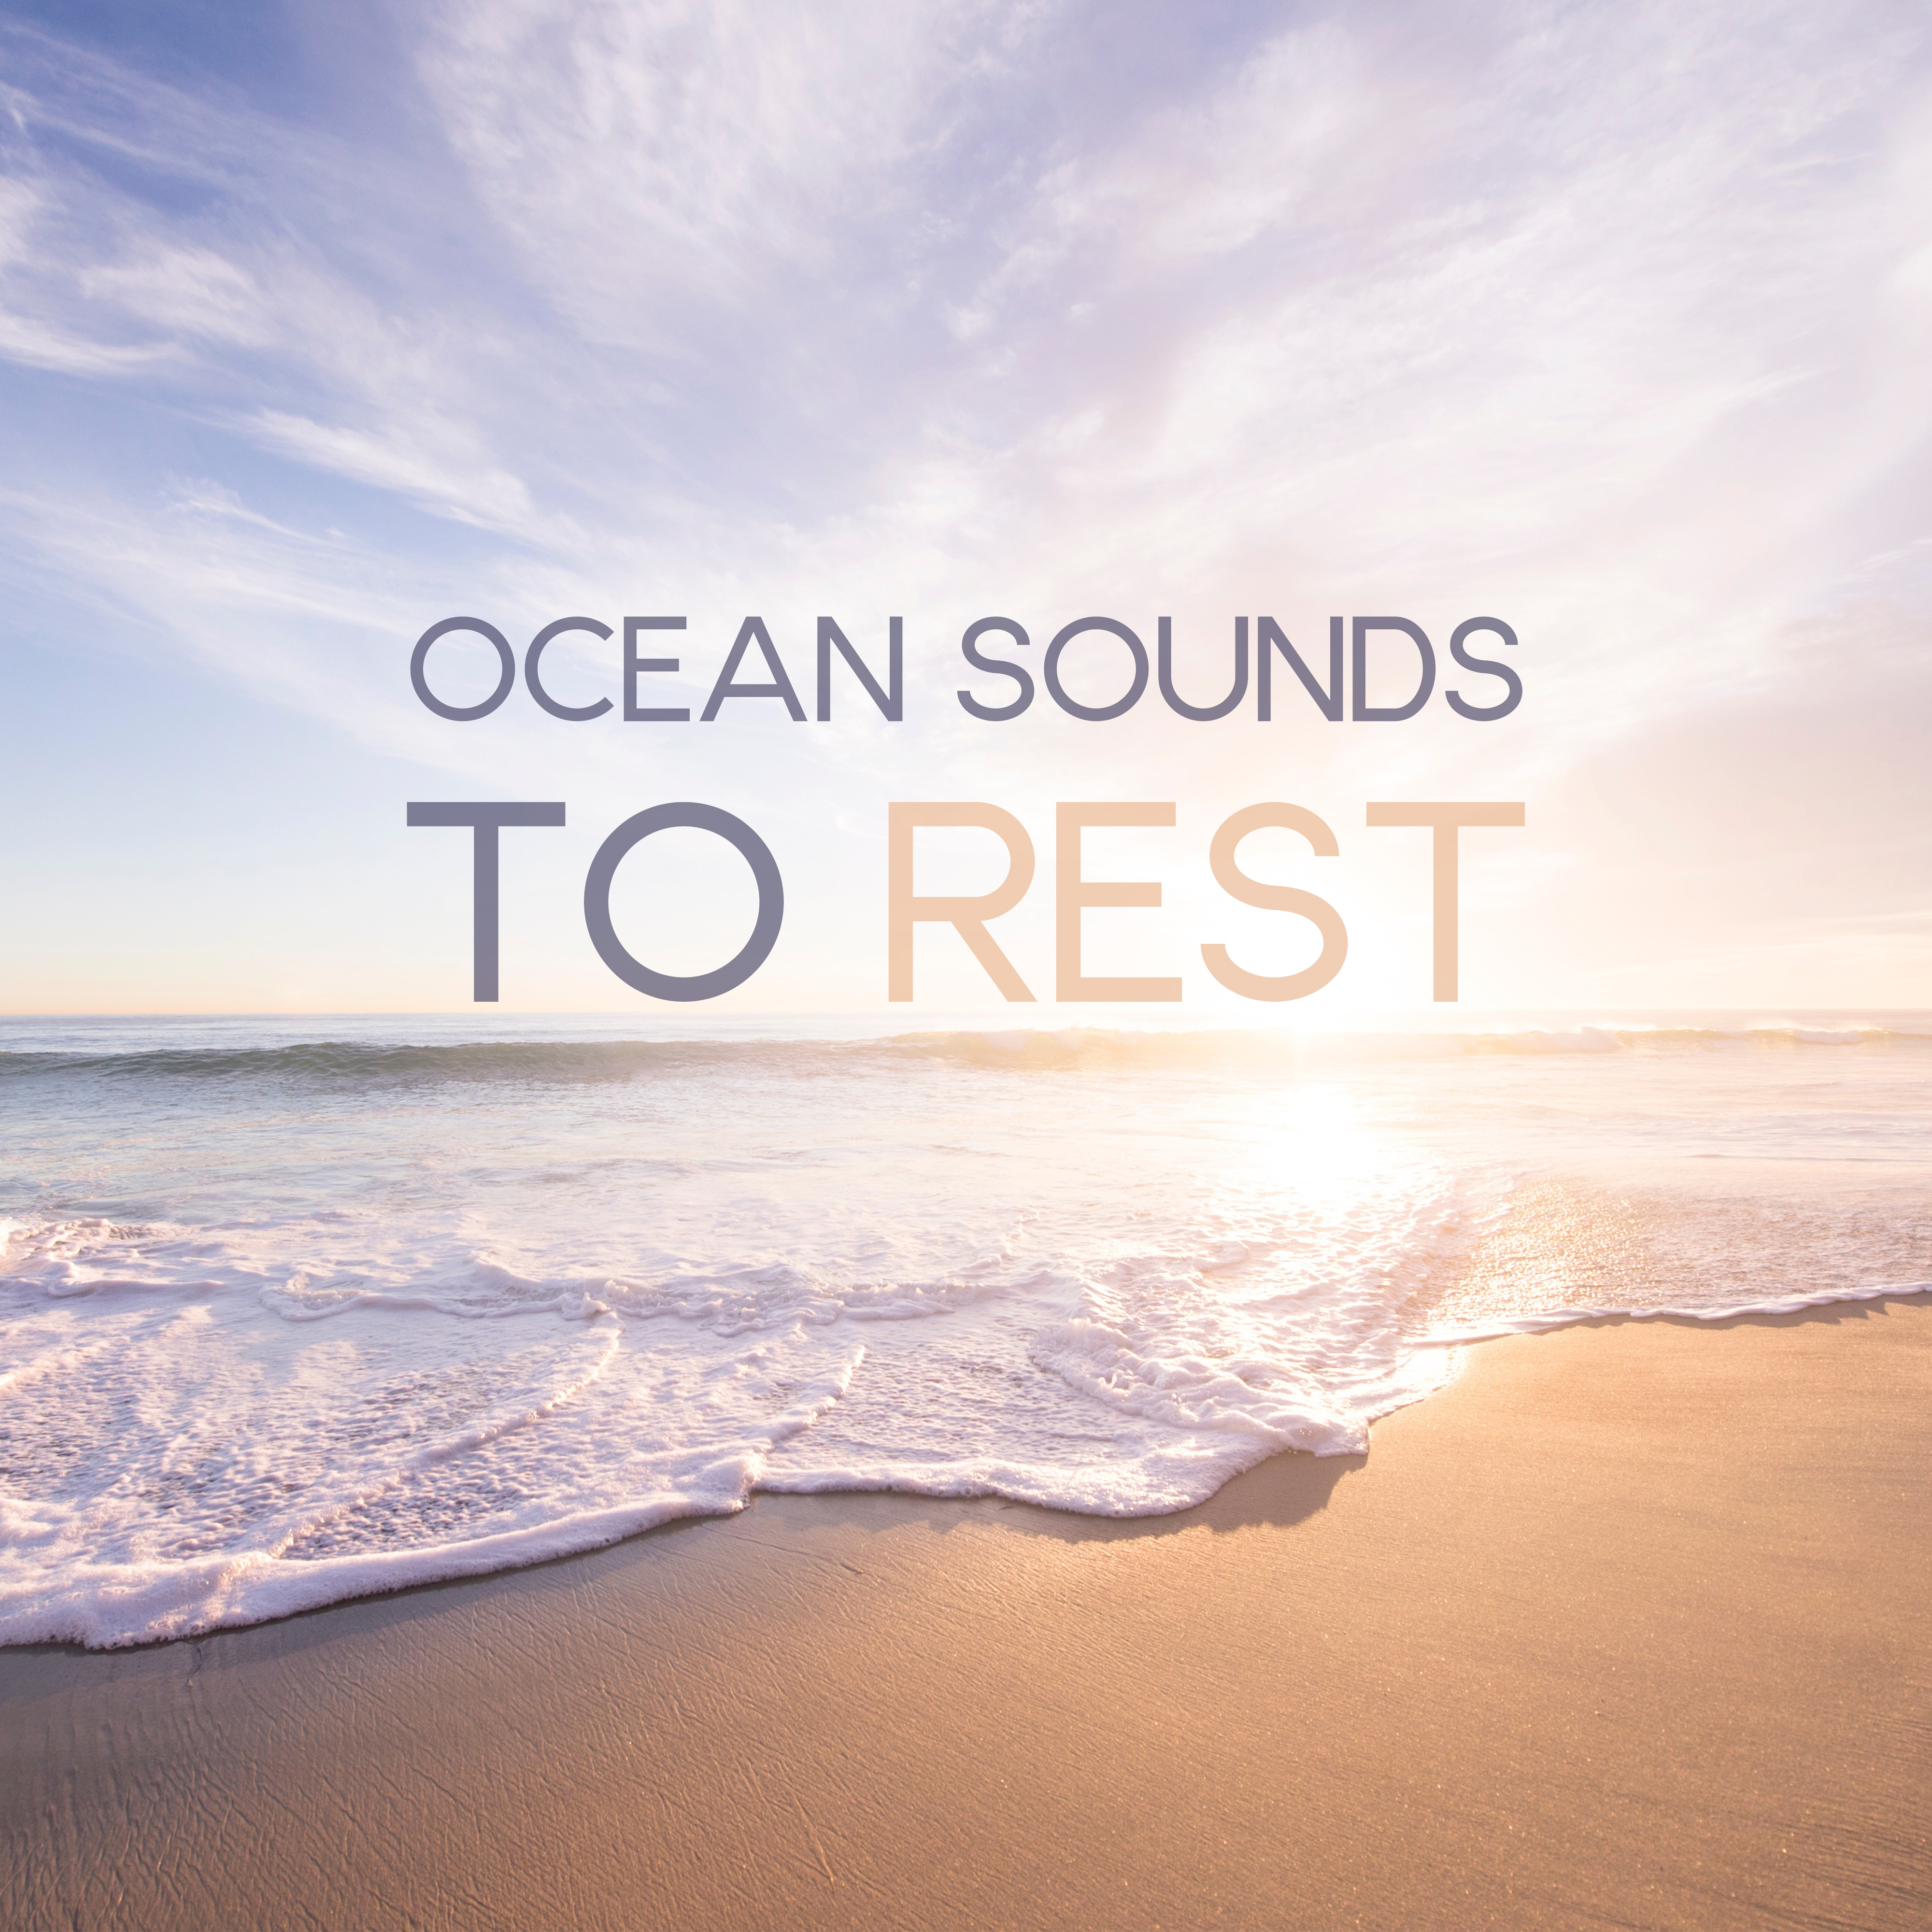 Ocean Sounds to Rest – Relaxing Nature Music, Healing Sounds, Sea Waves, Water Relaxation